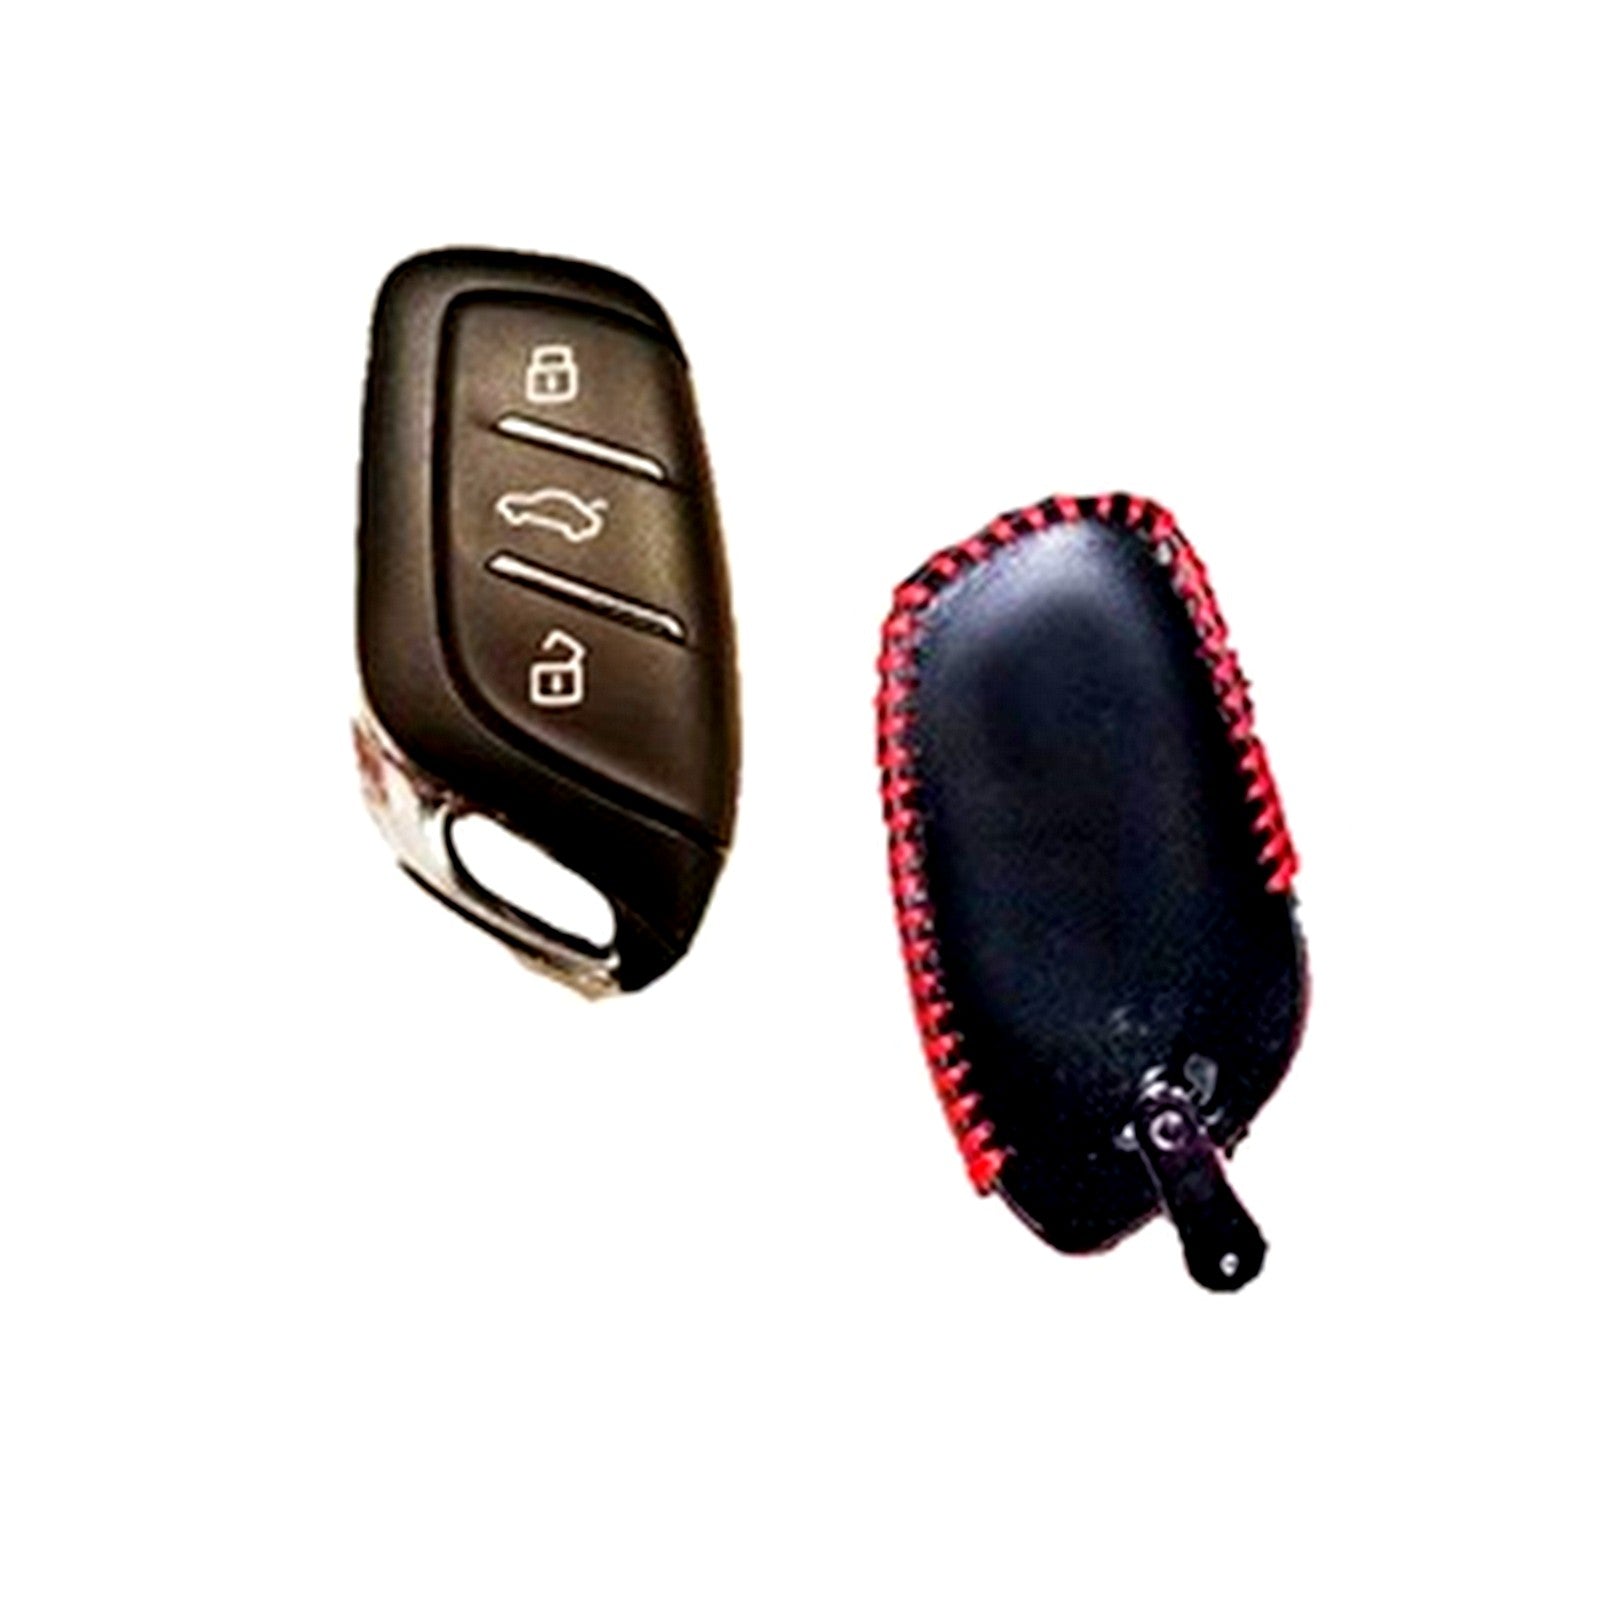 KEY COVER LEATHER PREMIUM QUALITY FOR MG HS